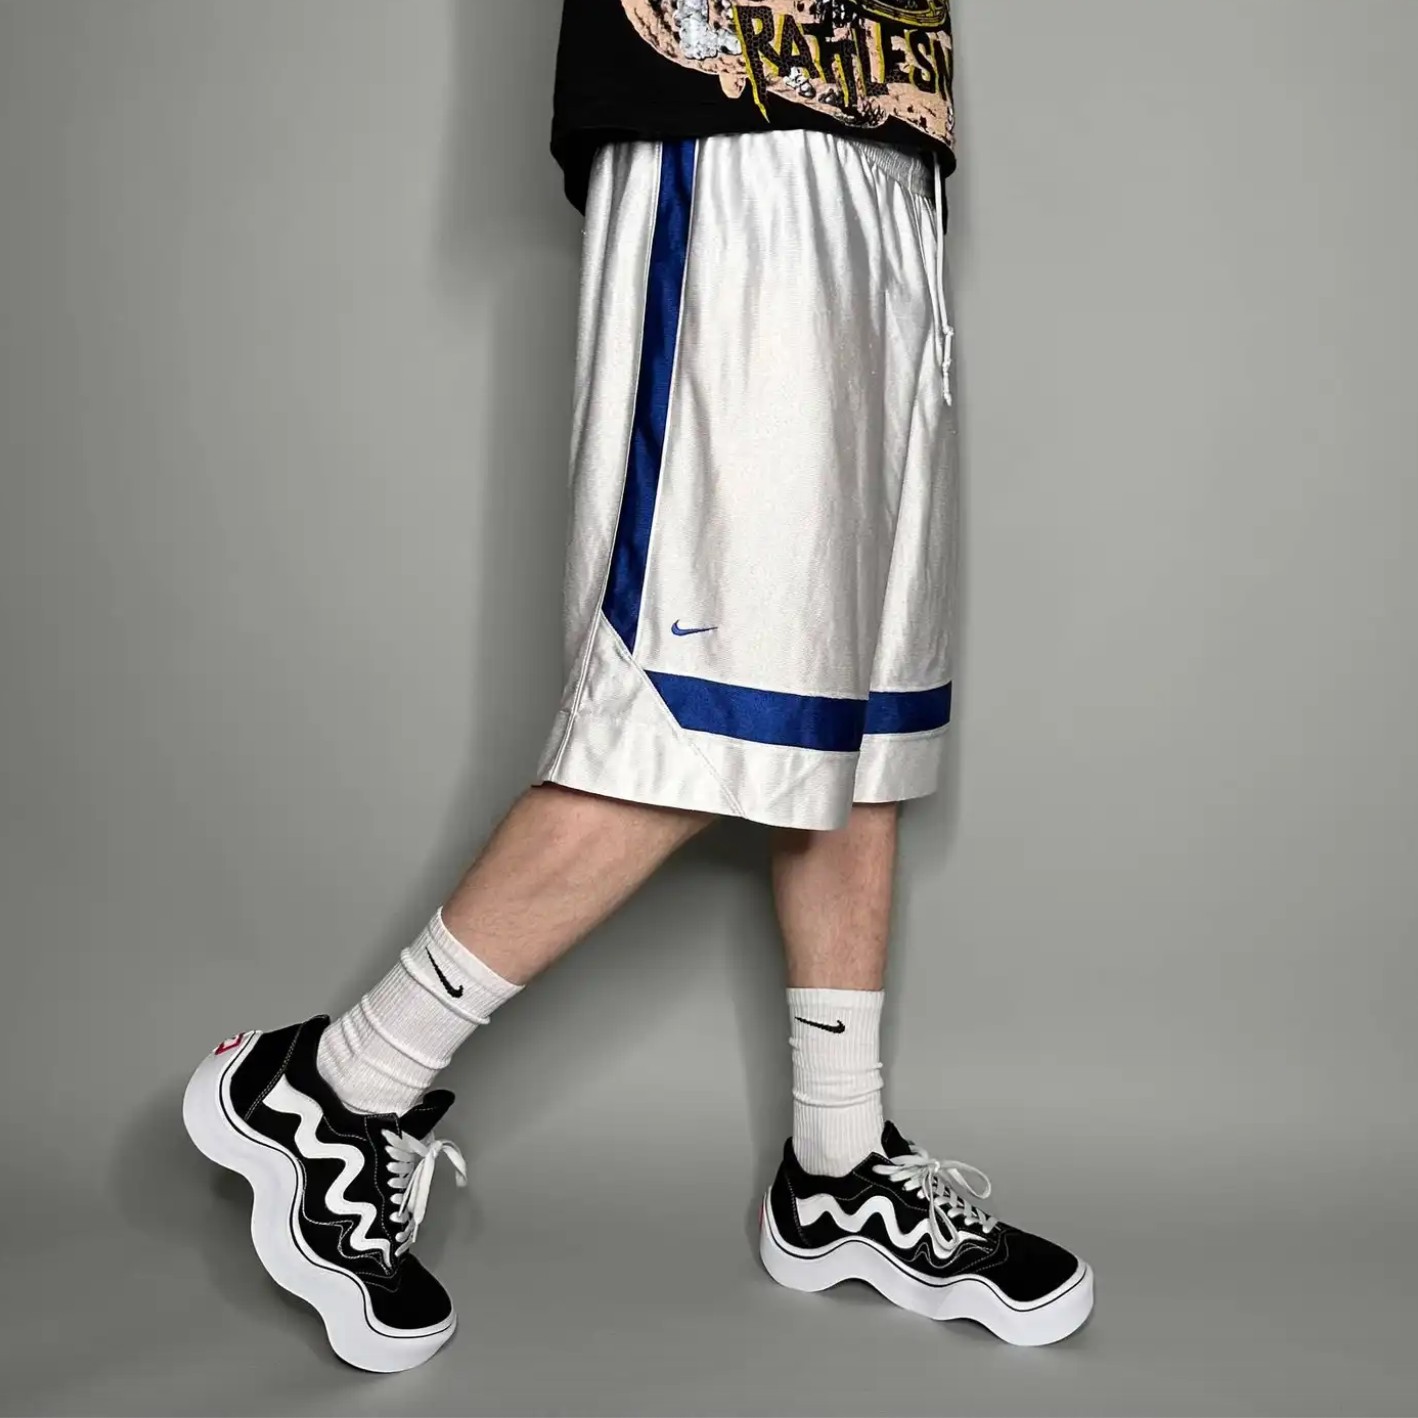 Your Favorite Basketball Shorts Are Finally Fashion